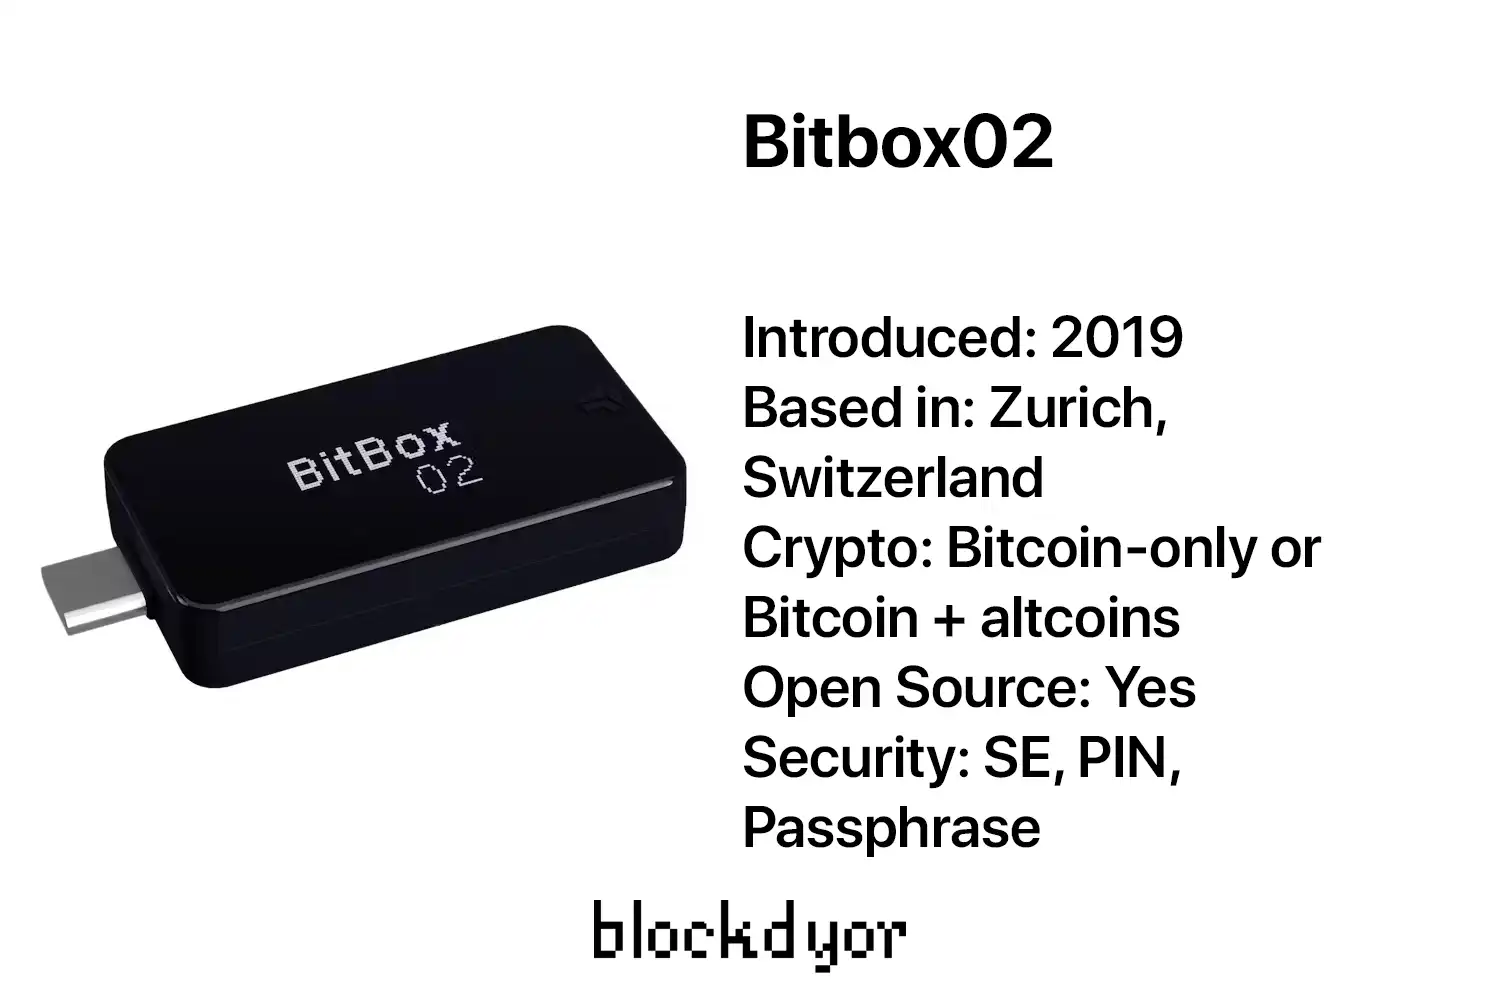 BitBox02 Overview